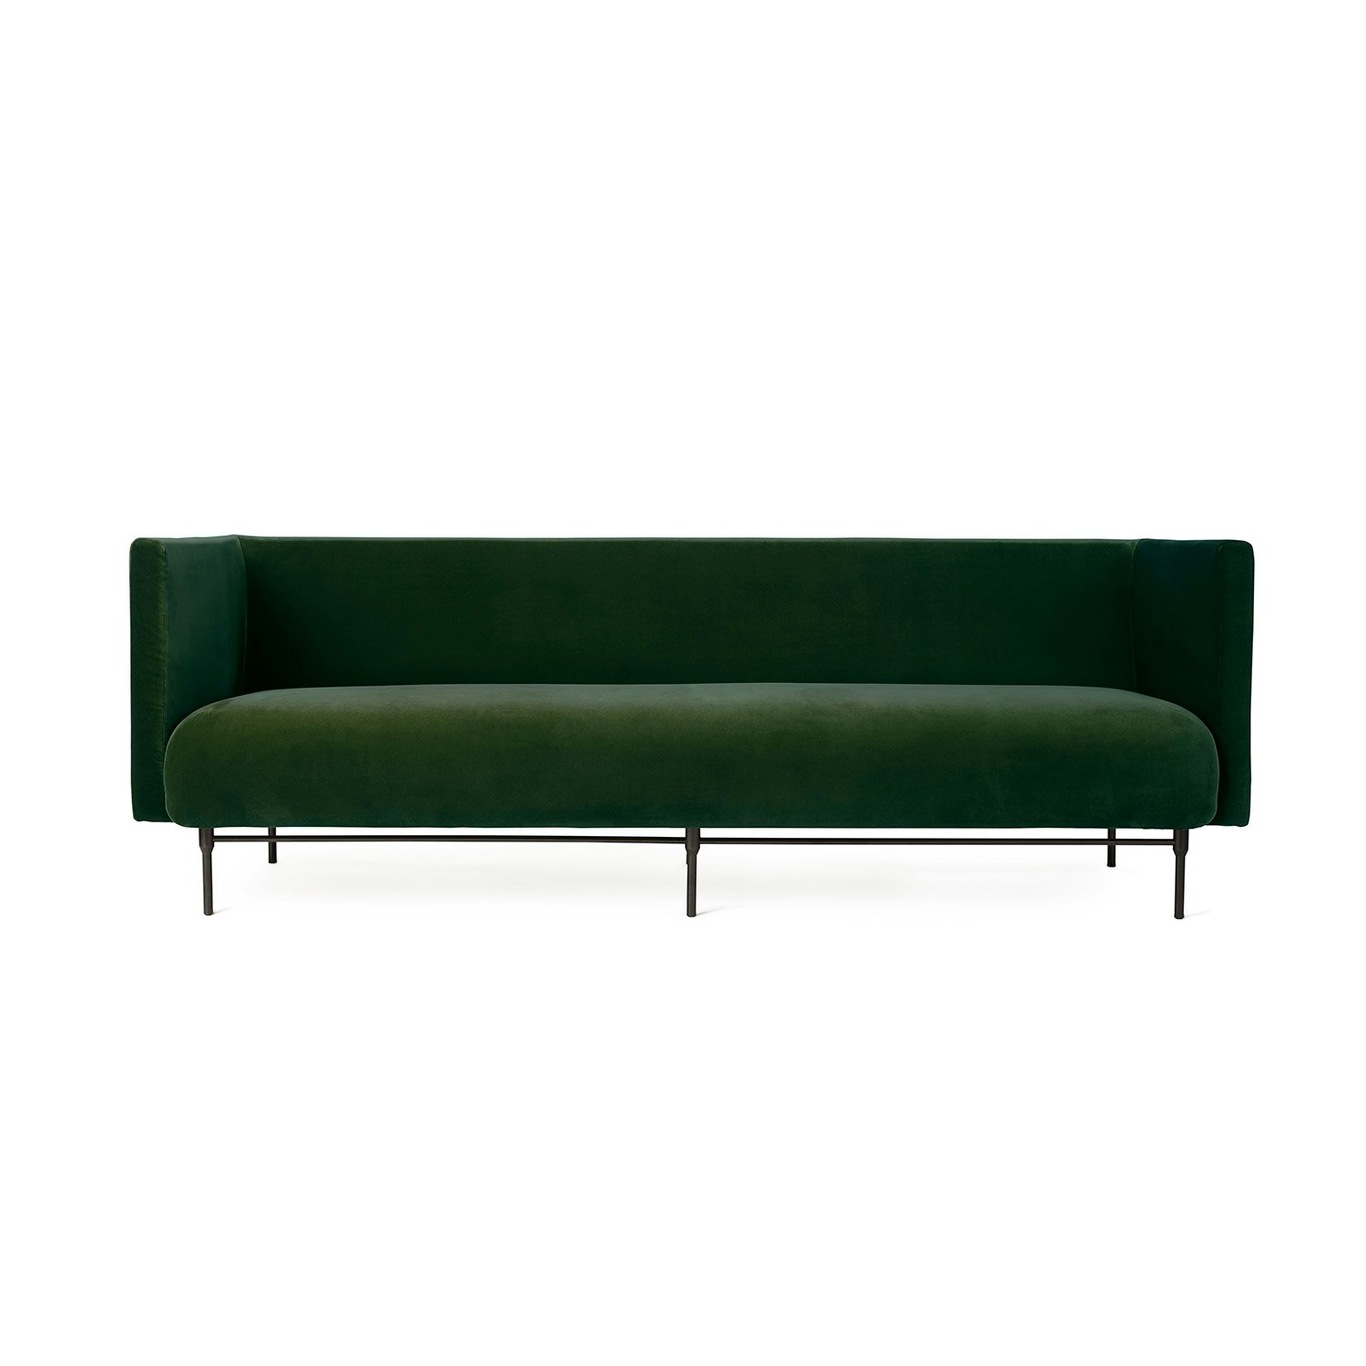 Galore 3-Seater Sofa, Forest green